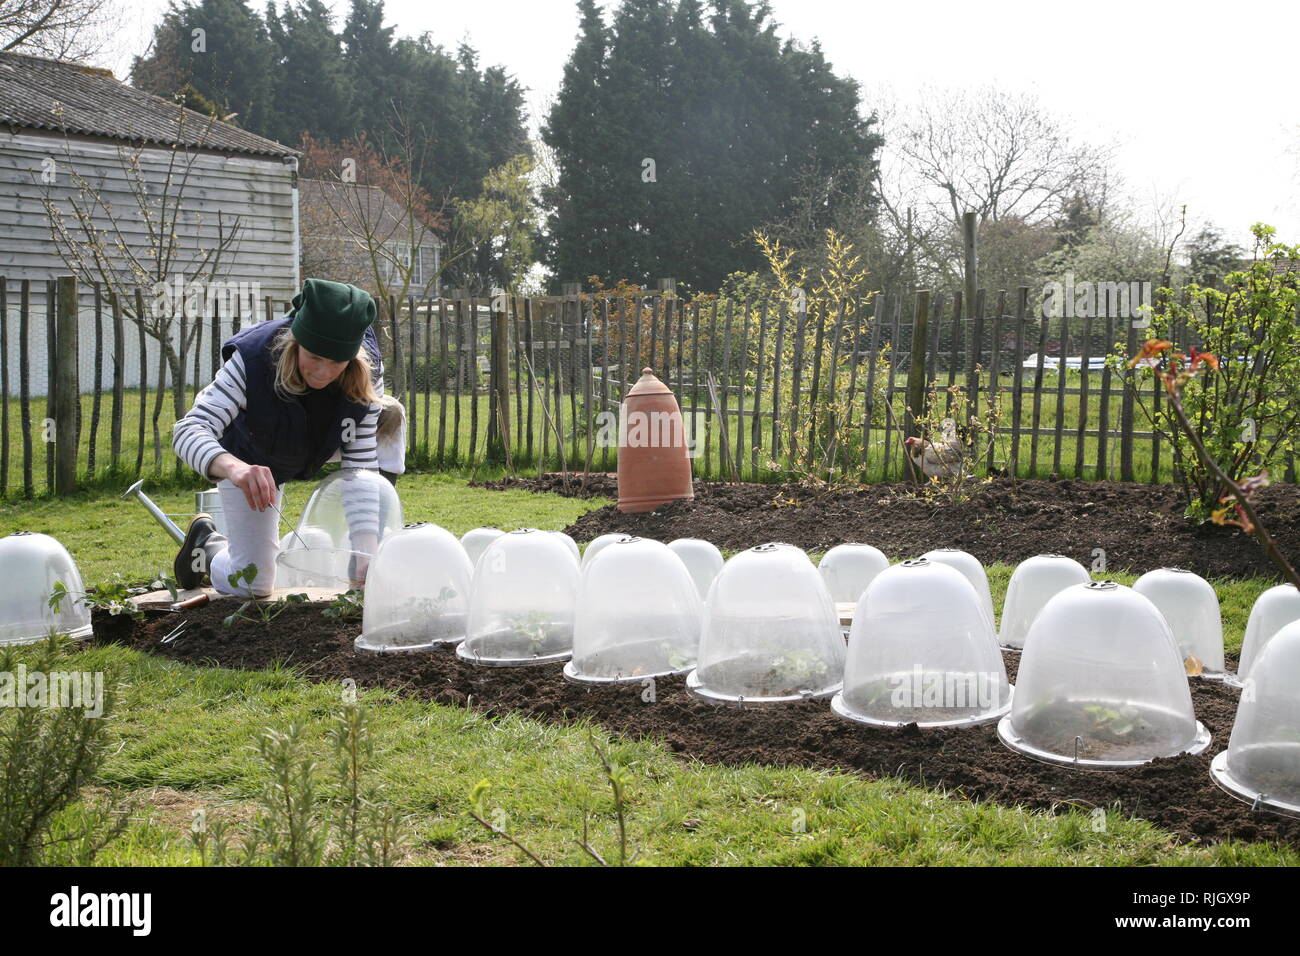 Gardening with cloches Stock Photo